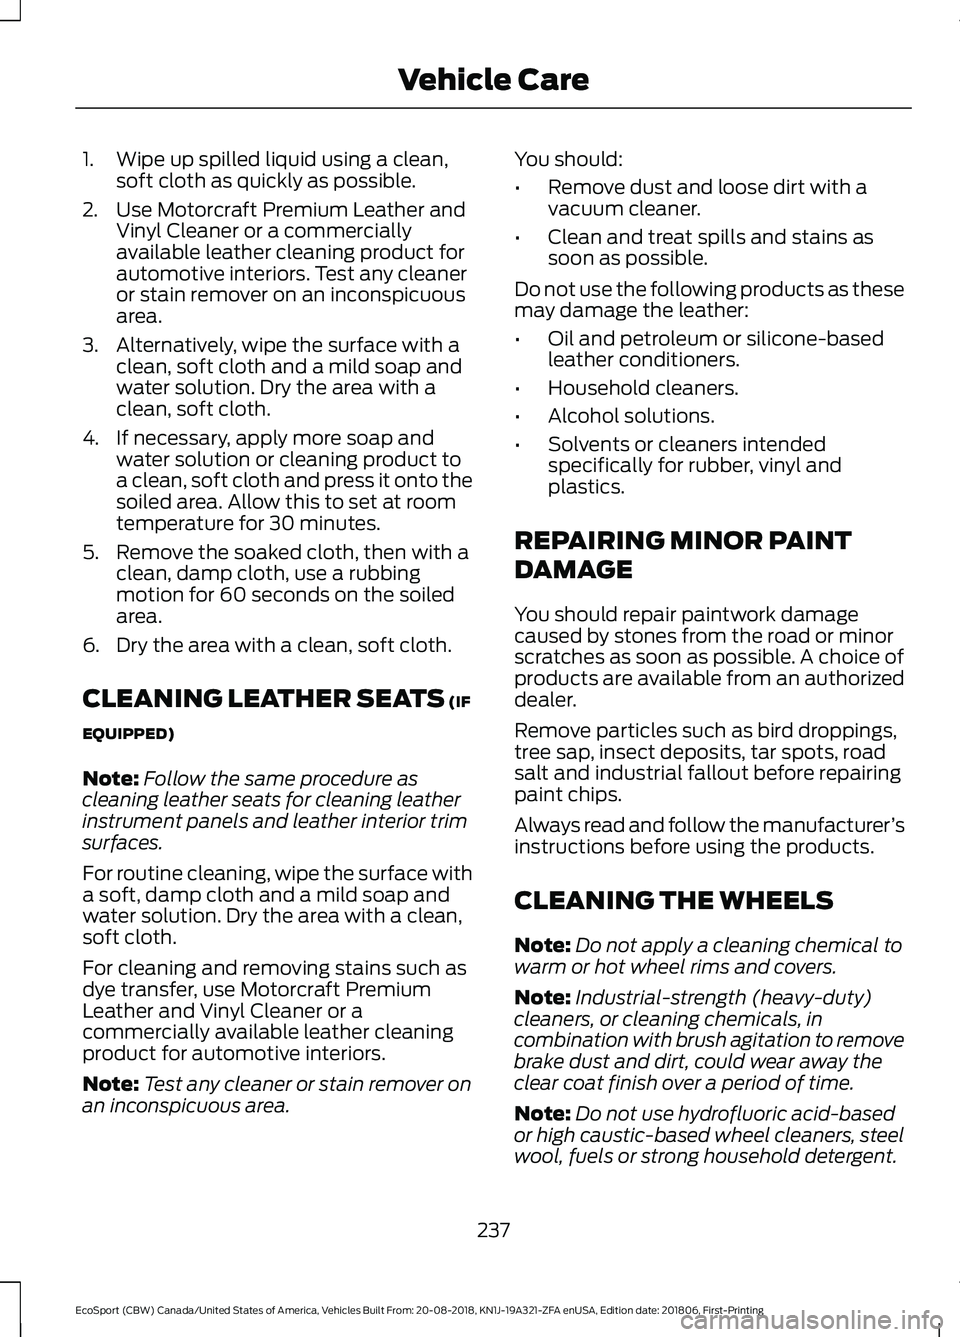 FORD ECOSPORT 2019 User Guide 1.Wipe up spilled liquid using a clean,soft cloth as quickly as possible.
2.Use Motorcraft Premium Leather andVinyl Cleaner or a commerciallyavailable leather cleaning product forautomotive interiors.